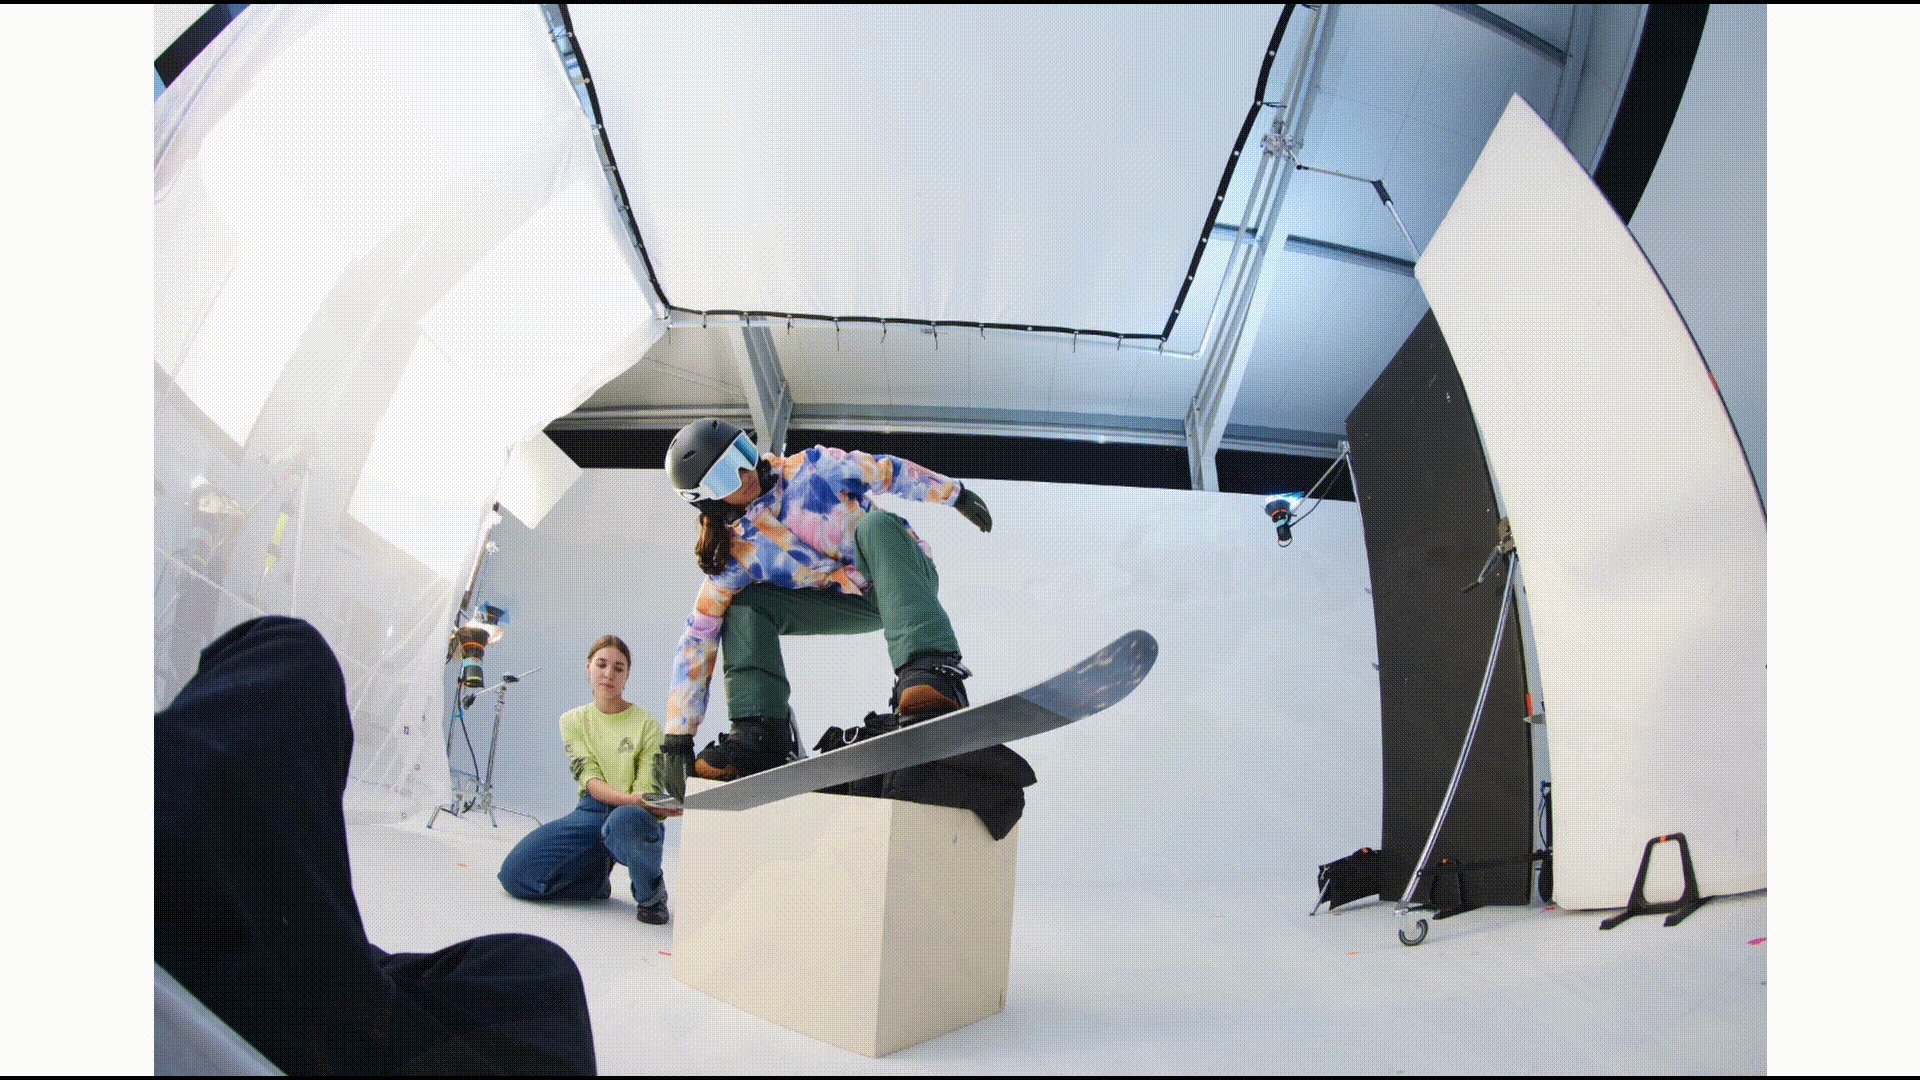 First image shows snowboarder in an indoor production space surrounded by screens; followed by a succession of graphic steps to archieve a CGI generated image of them in the mountains